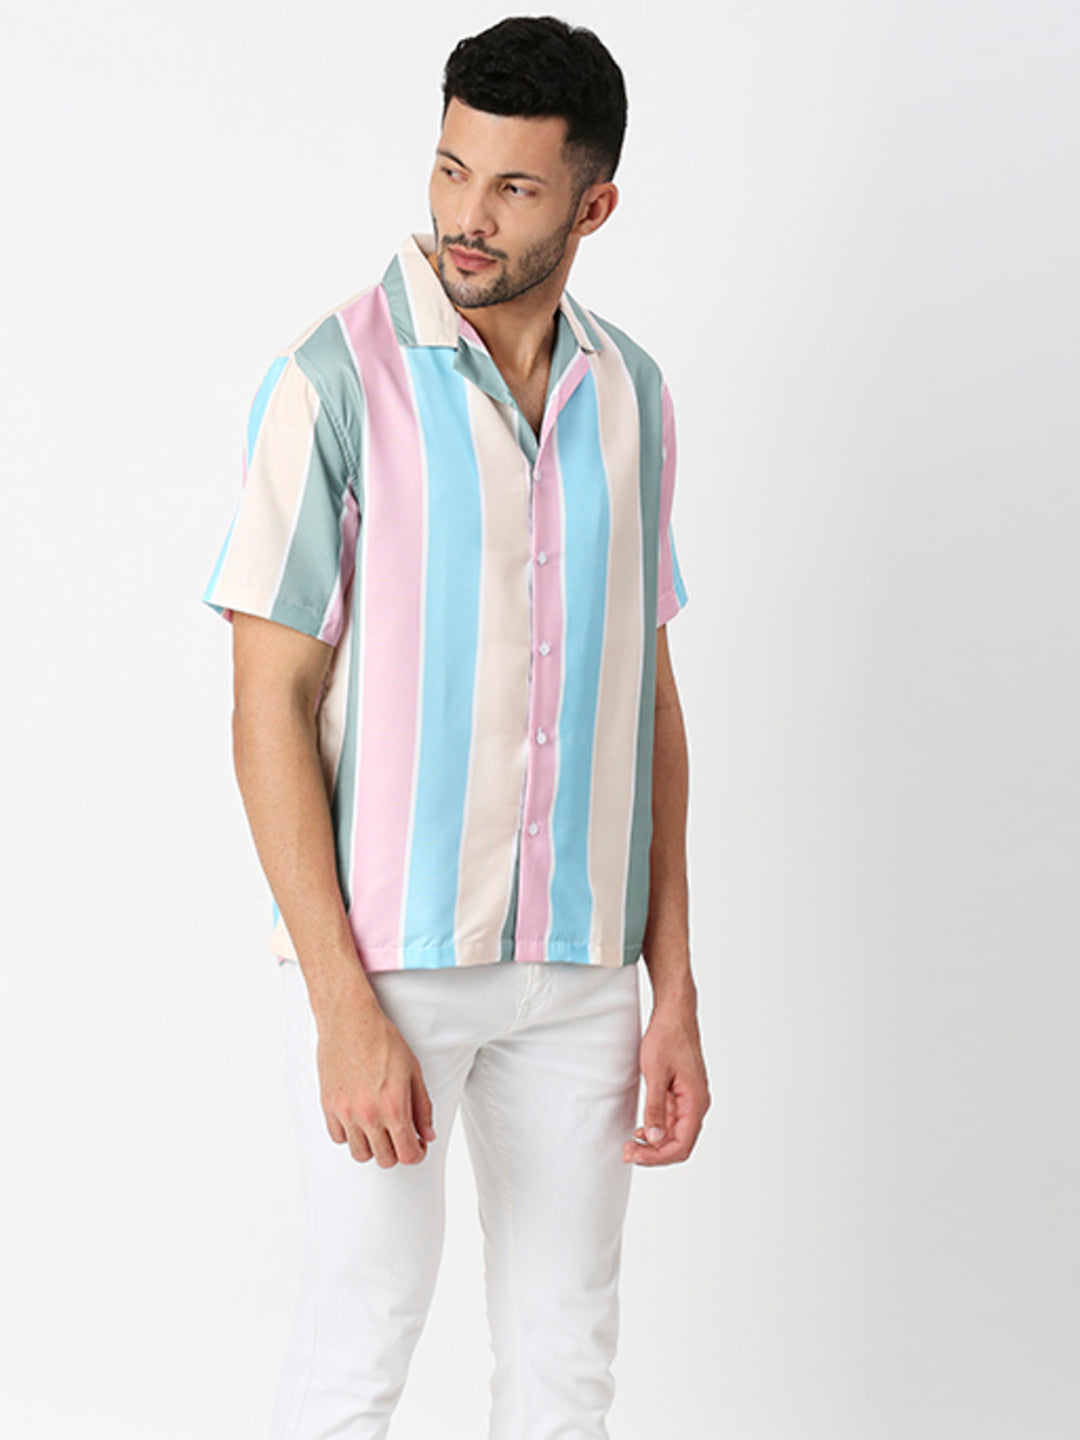 Hemsters Multicolored Striped Half Sleeves Shirt For Men